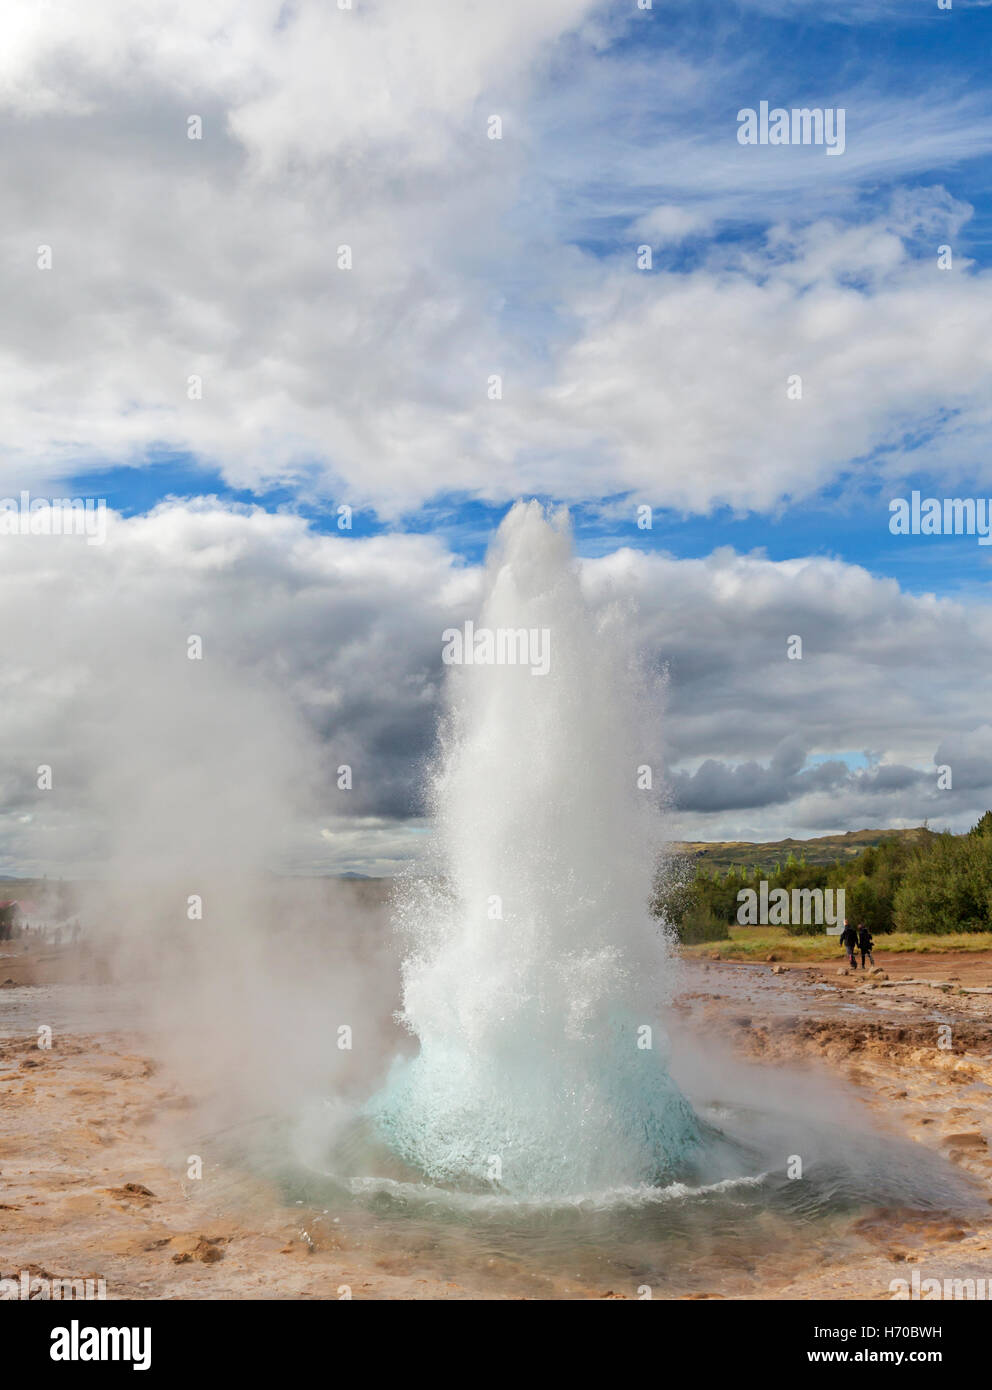 A view of the Strokkur Geysir, also known as Geyser, in Iceland. Stock Photo